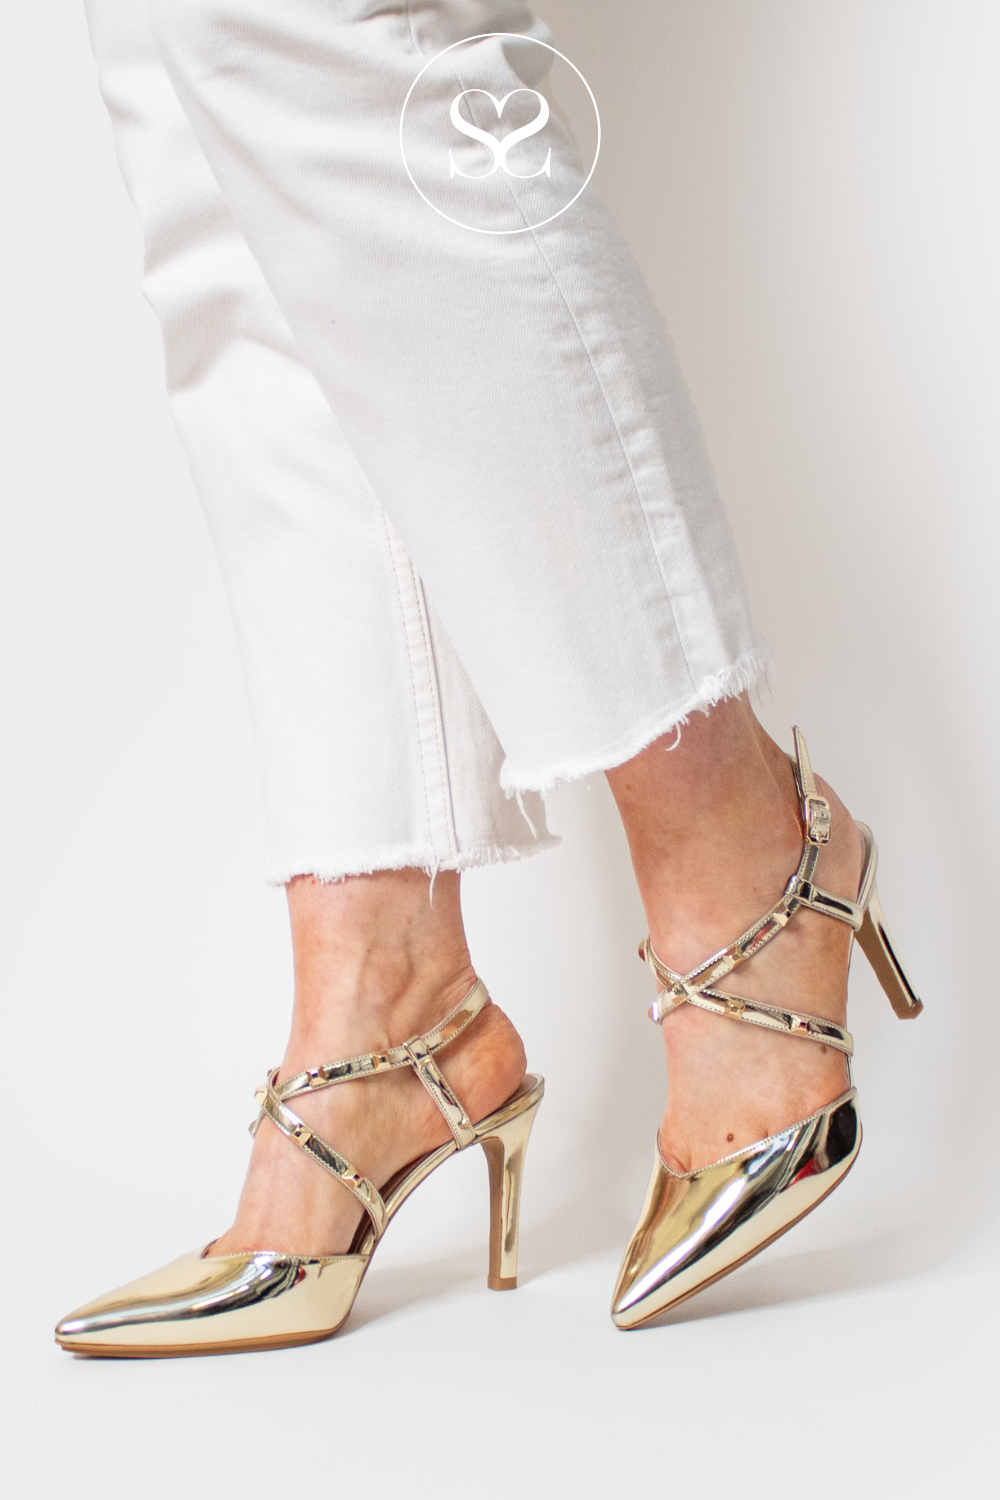 LODI RASIUN GOLD METALLIC MIRRORED POINTED TOE STRAPPY SLINGBACK WITH STUDS ON THE STRAP. HIGH STILETTO HEEL